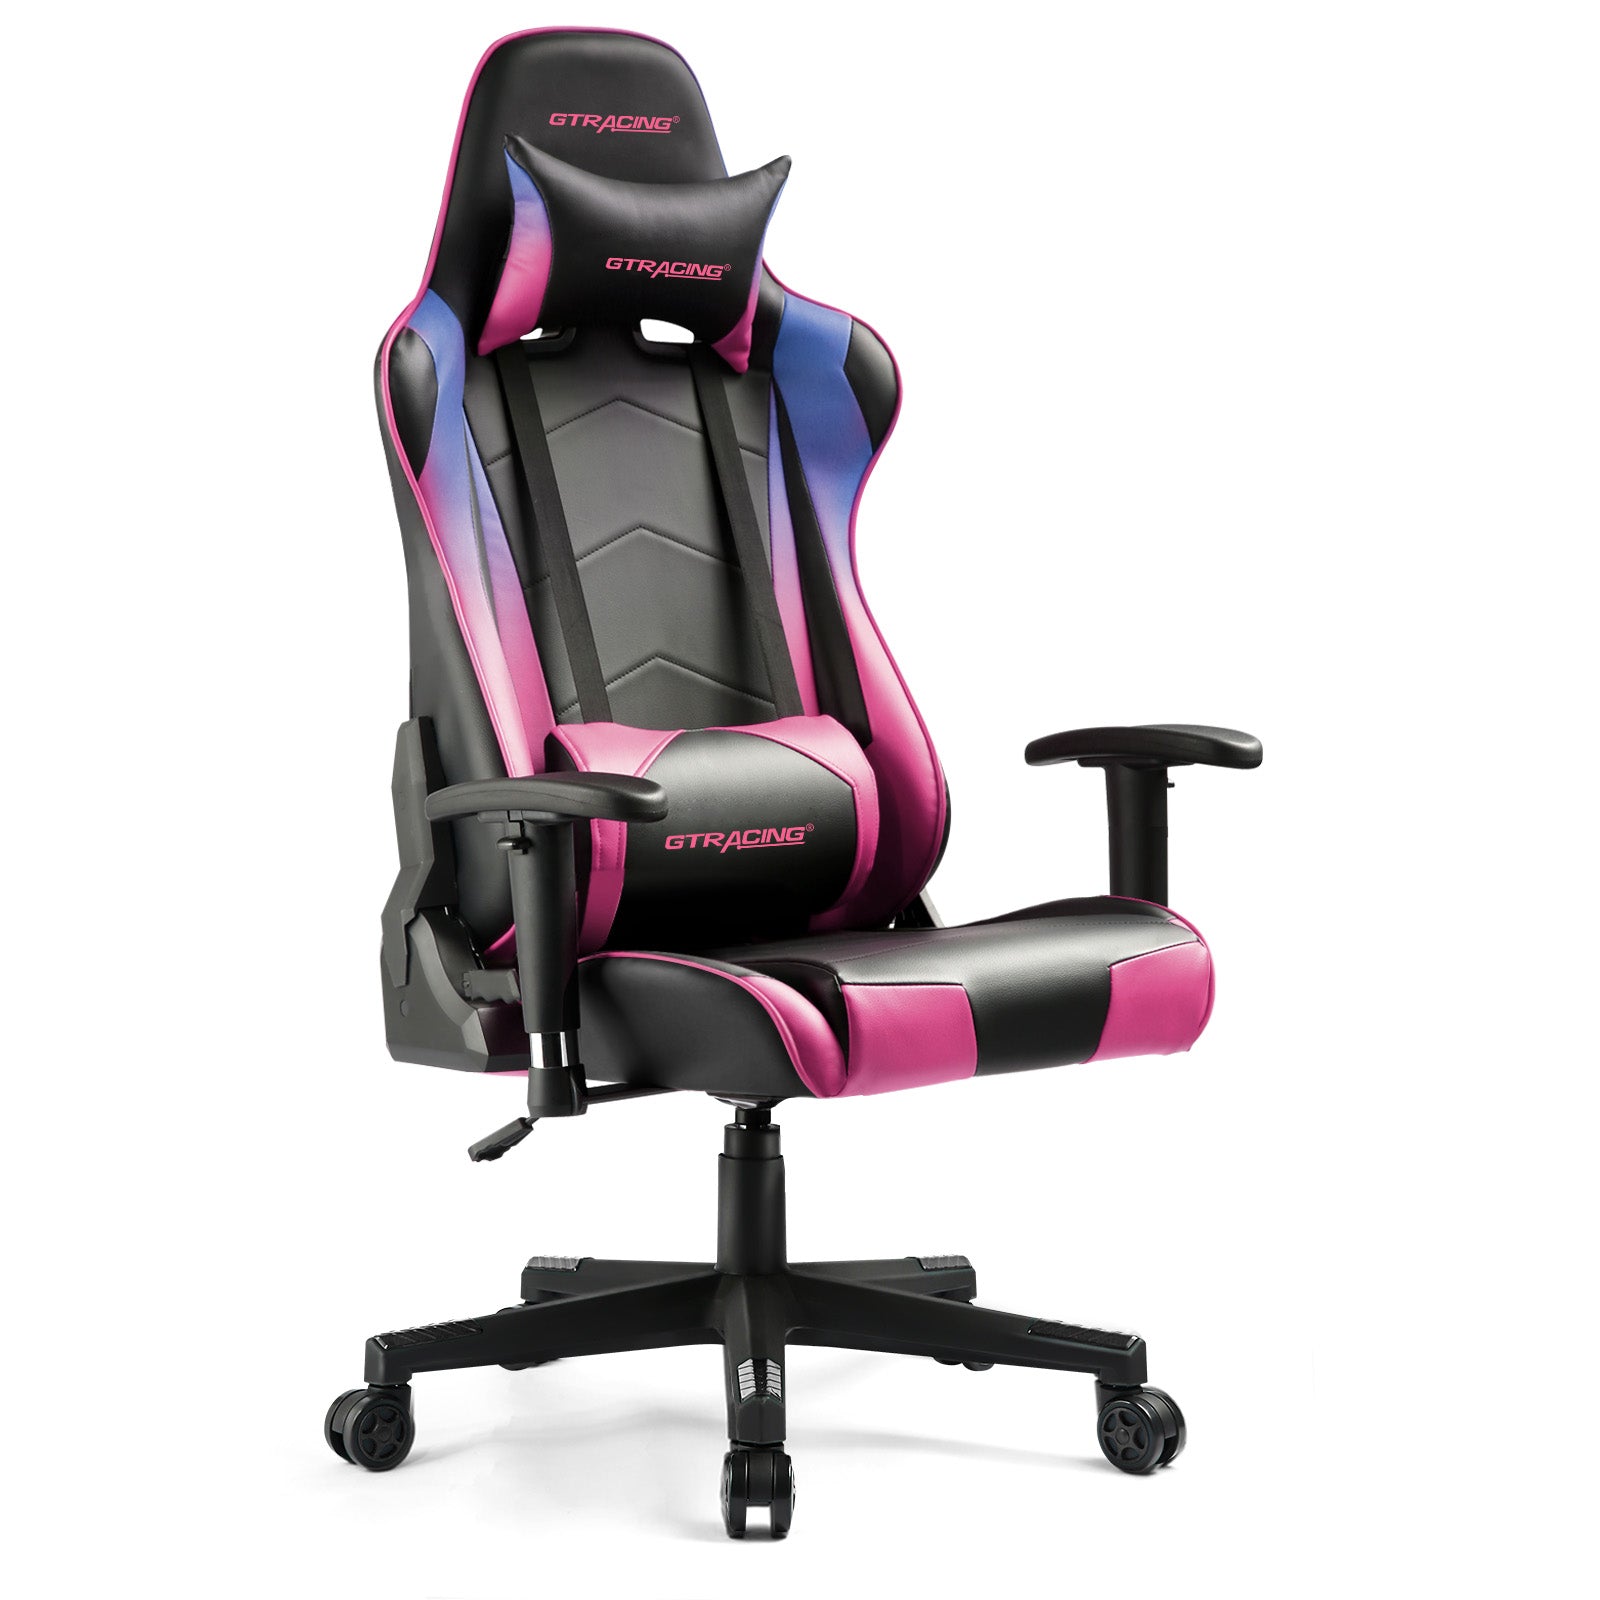 Pro Series GT099 | GTRacing Gaming Chair